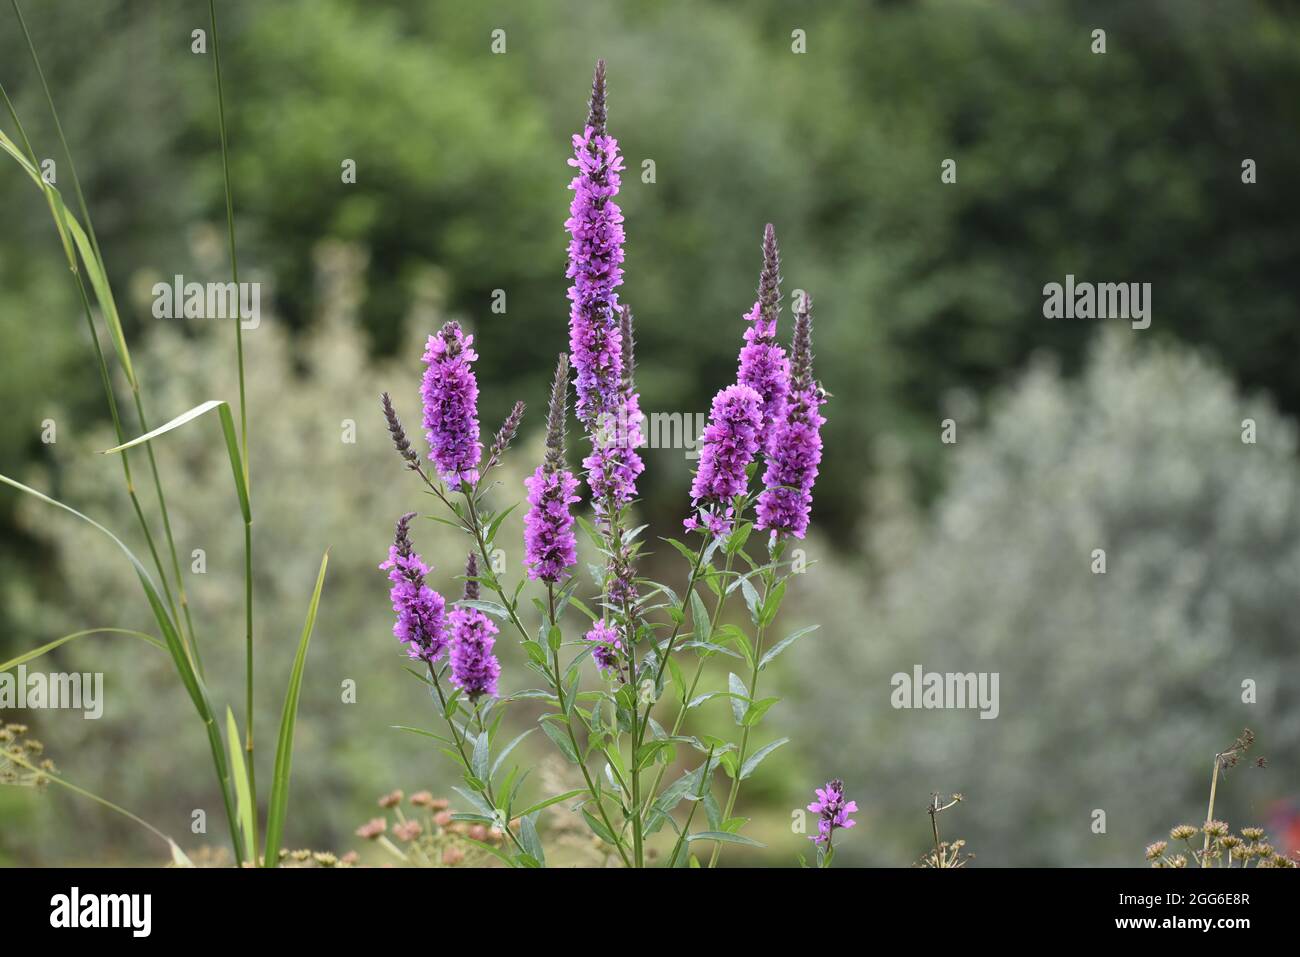 Close-Up Image of Wild Purple Loosestrife (Lythrum salicaria) Flowering Plant Against a Blurred Countryside Background, Taken on a Nature Reserve, UK Stock Photo